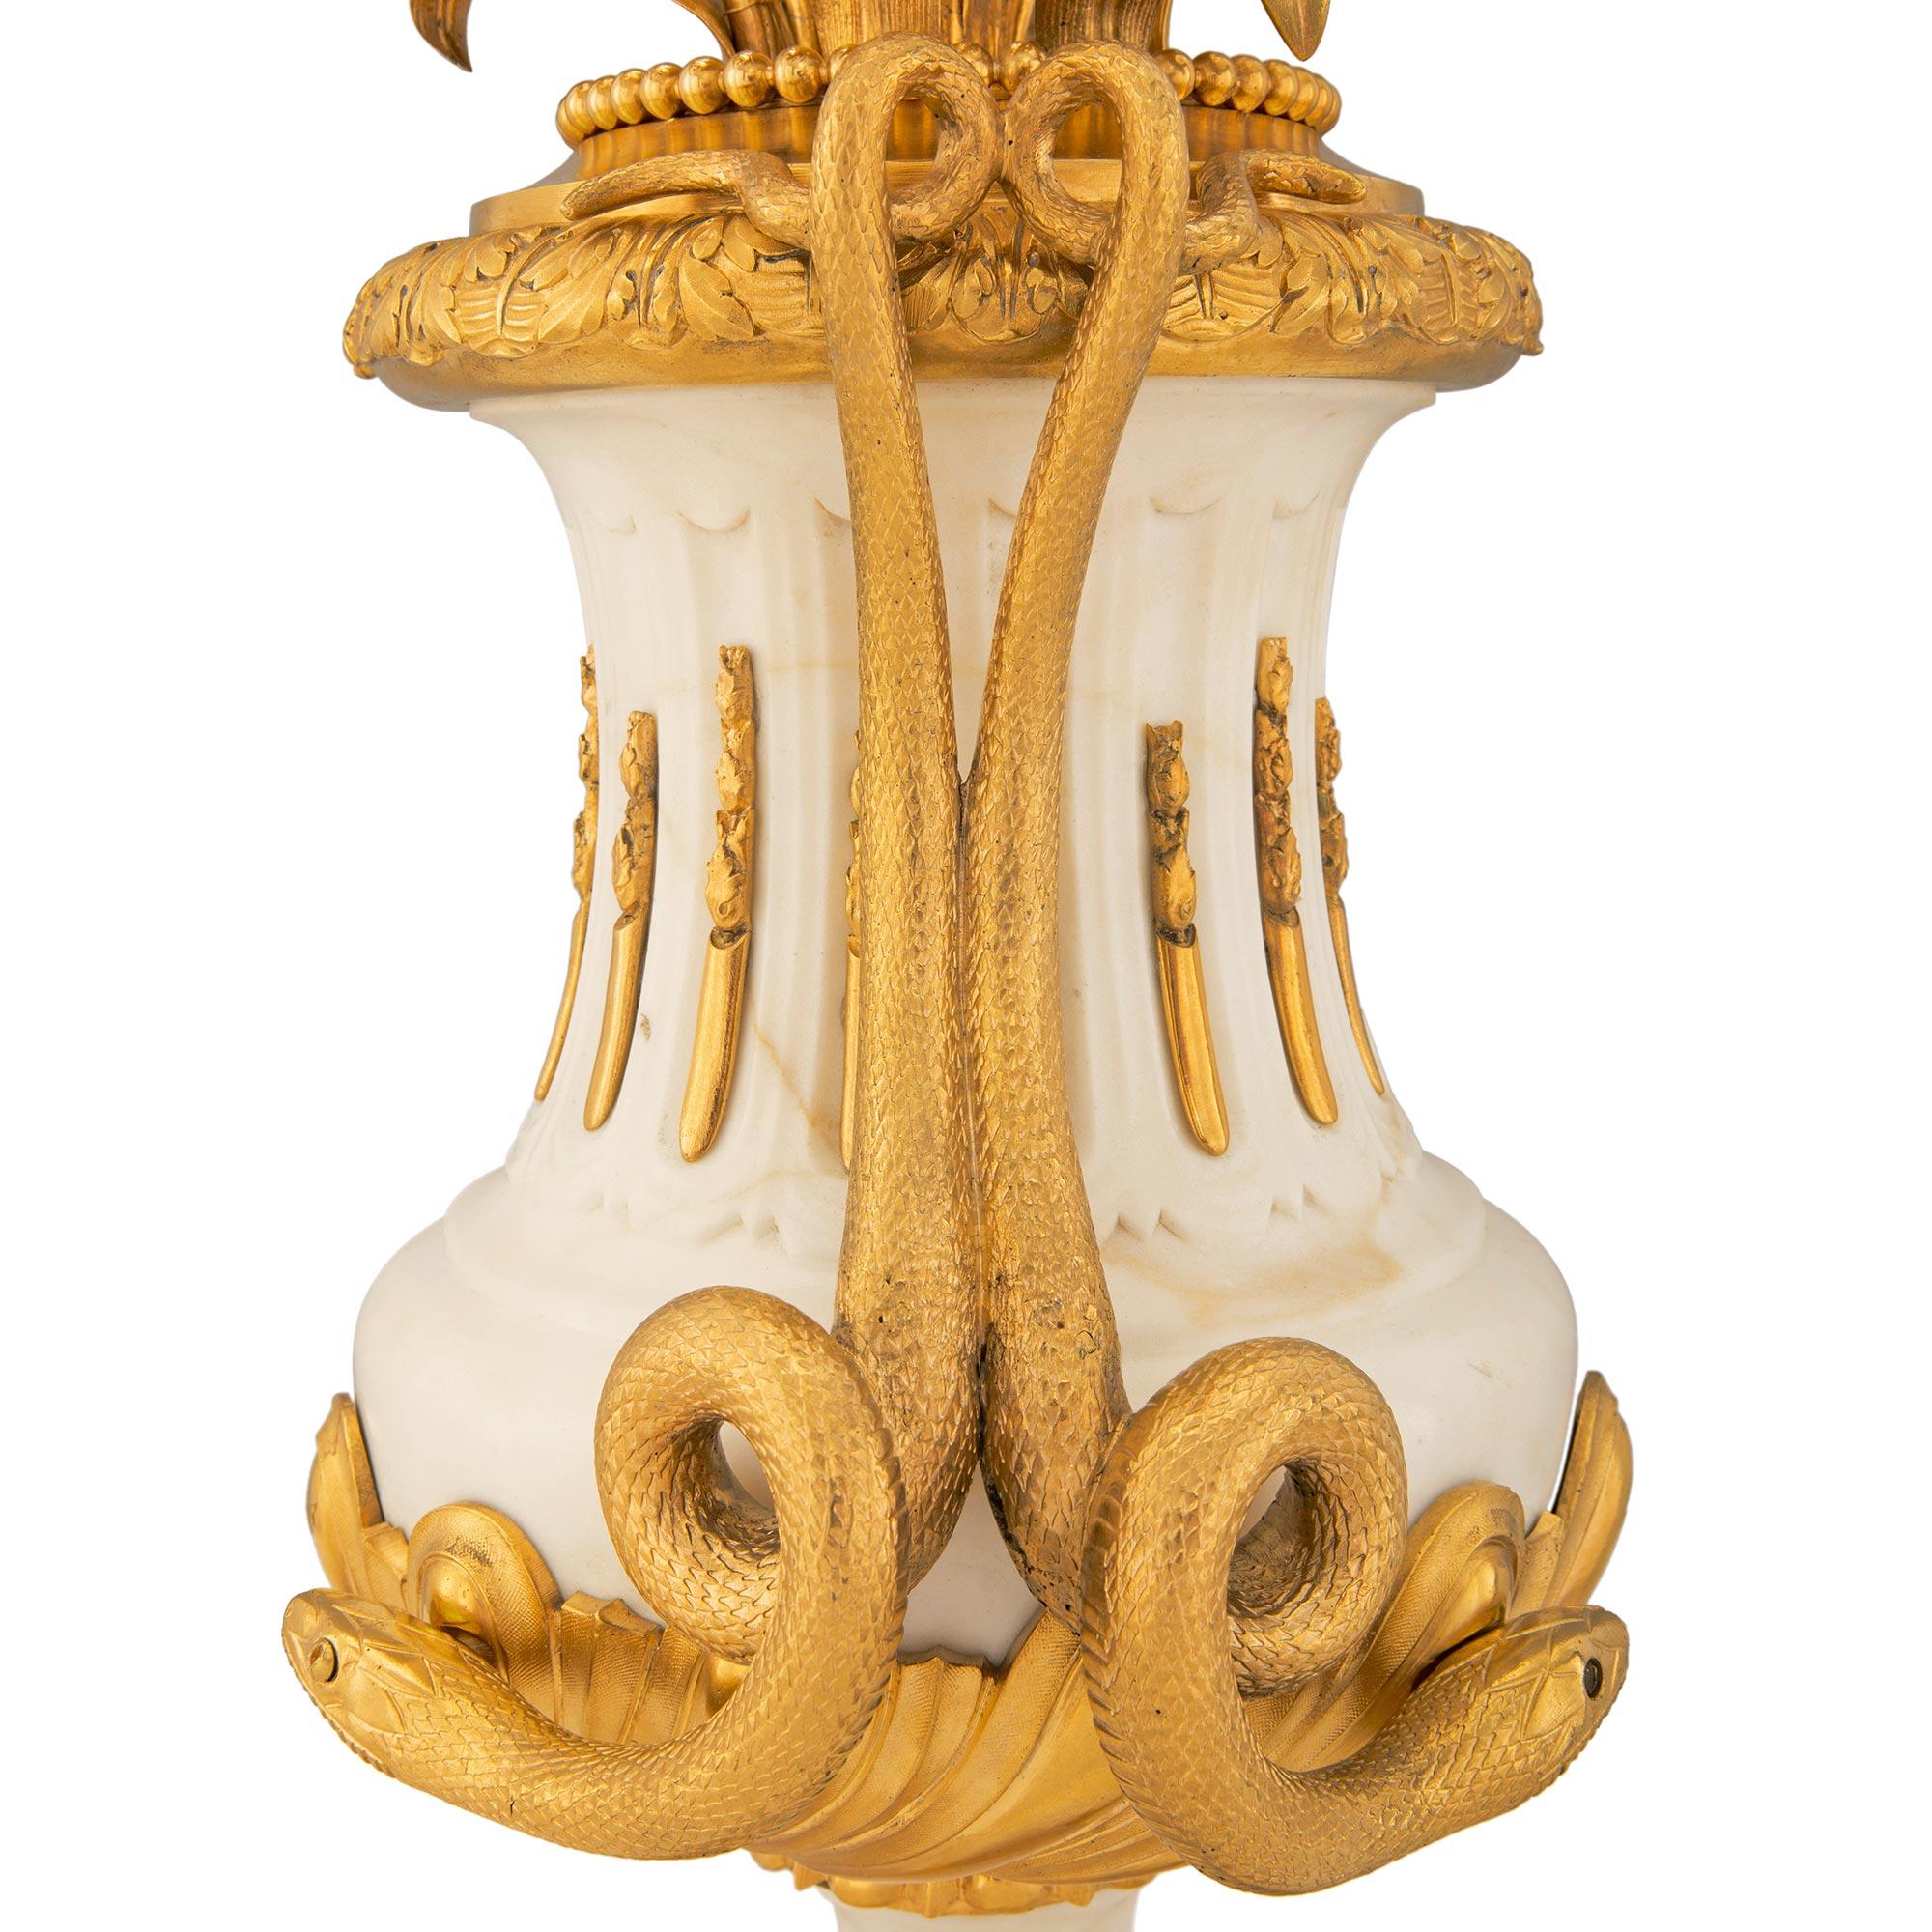 True Pair of French 19th Century Louis XVI St. Marble & Ormolu Candelabra Lamps For Sale 3